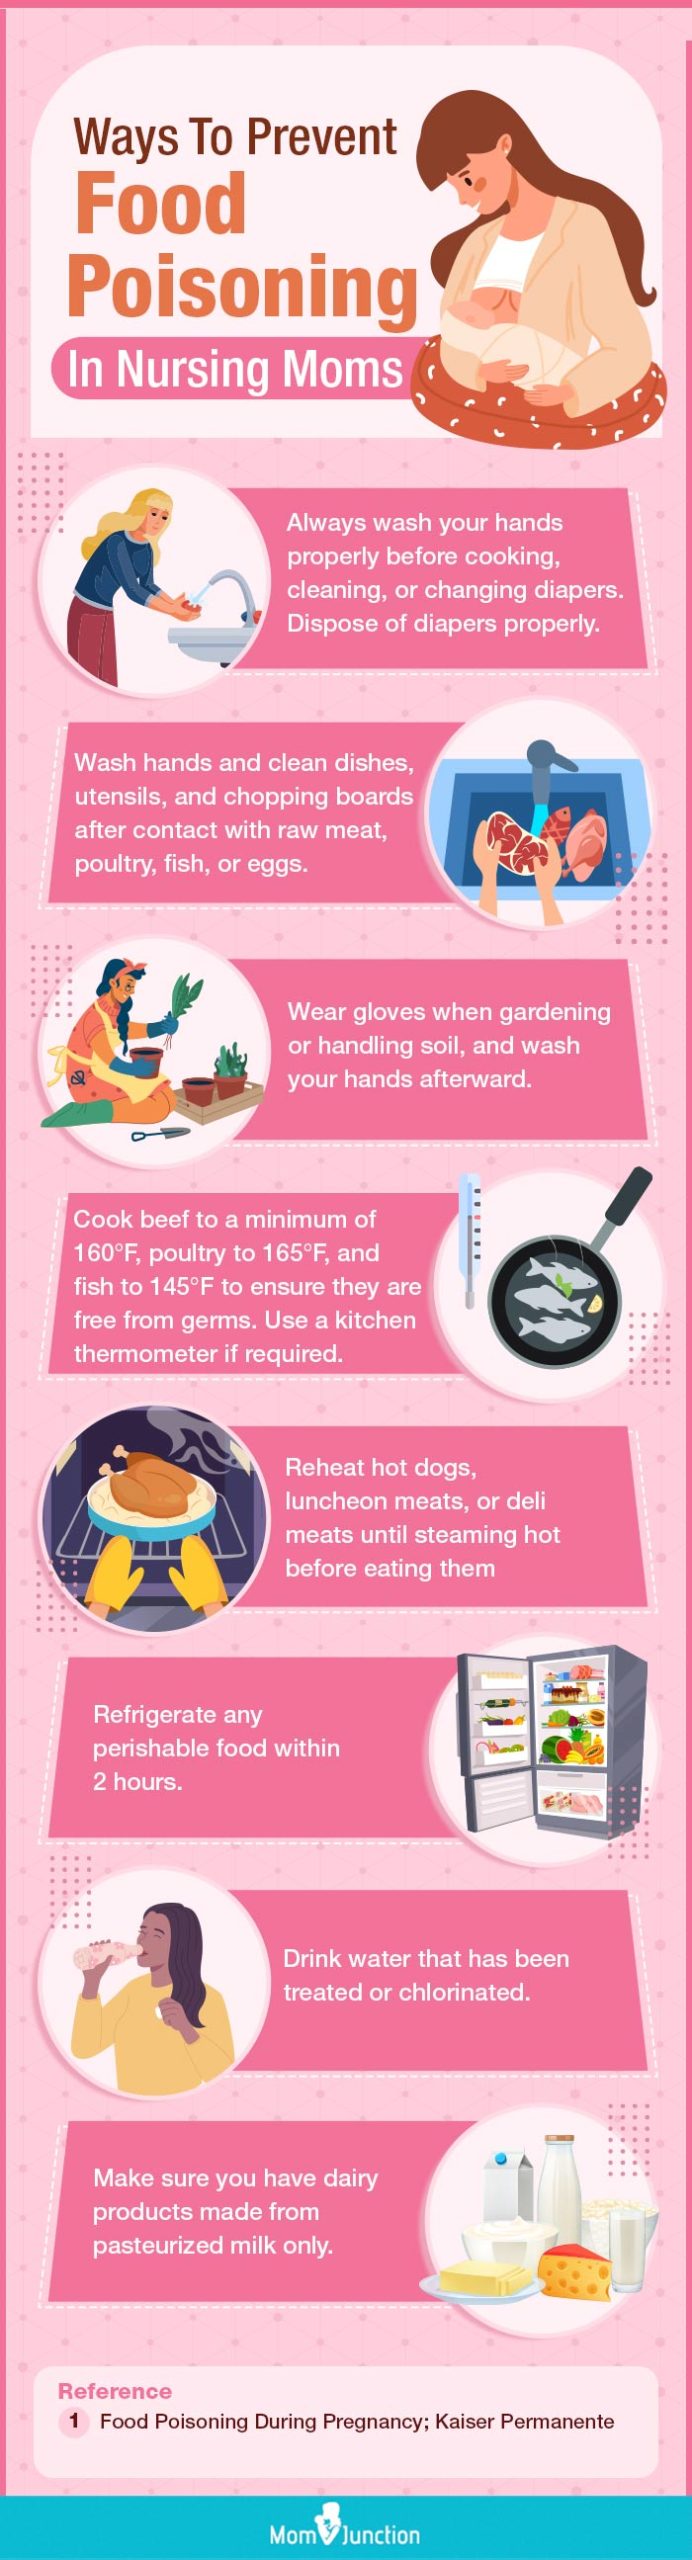 ways to prevent food poisoning in nursing moms (infographic)